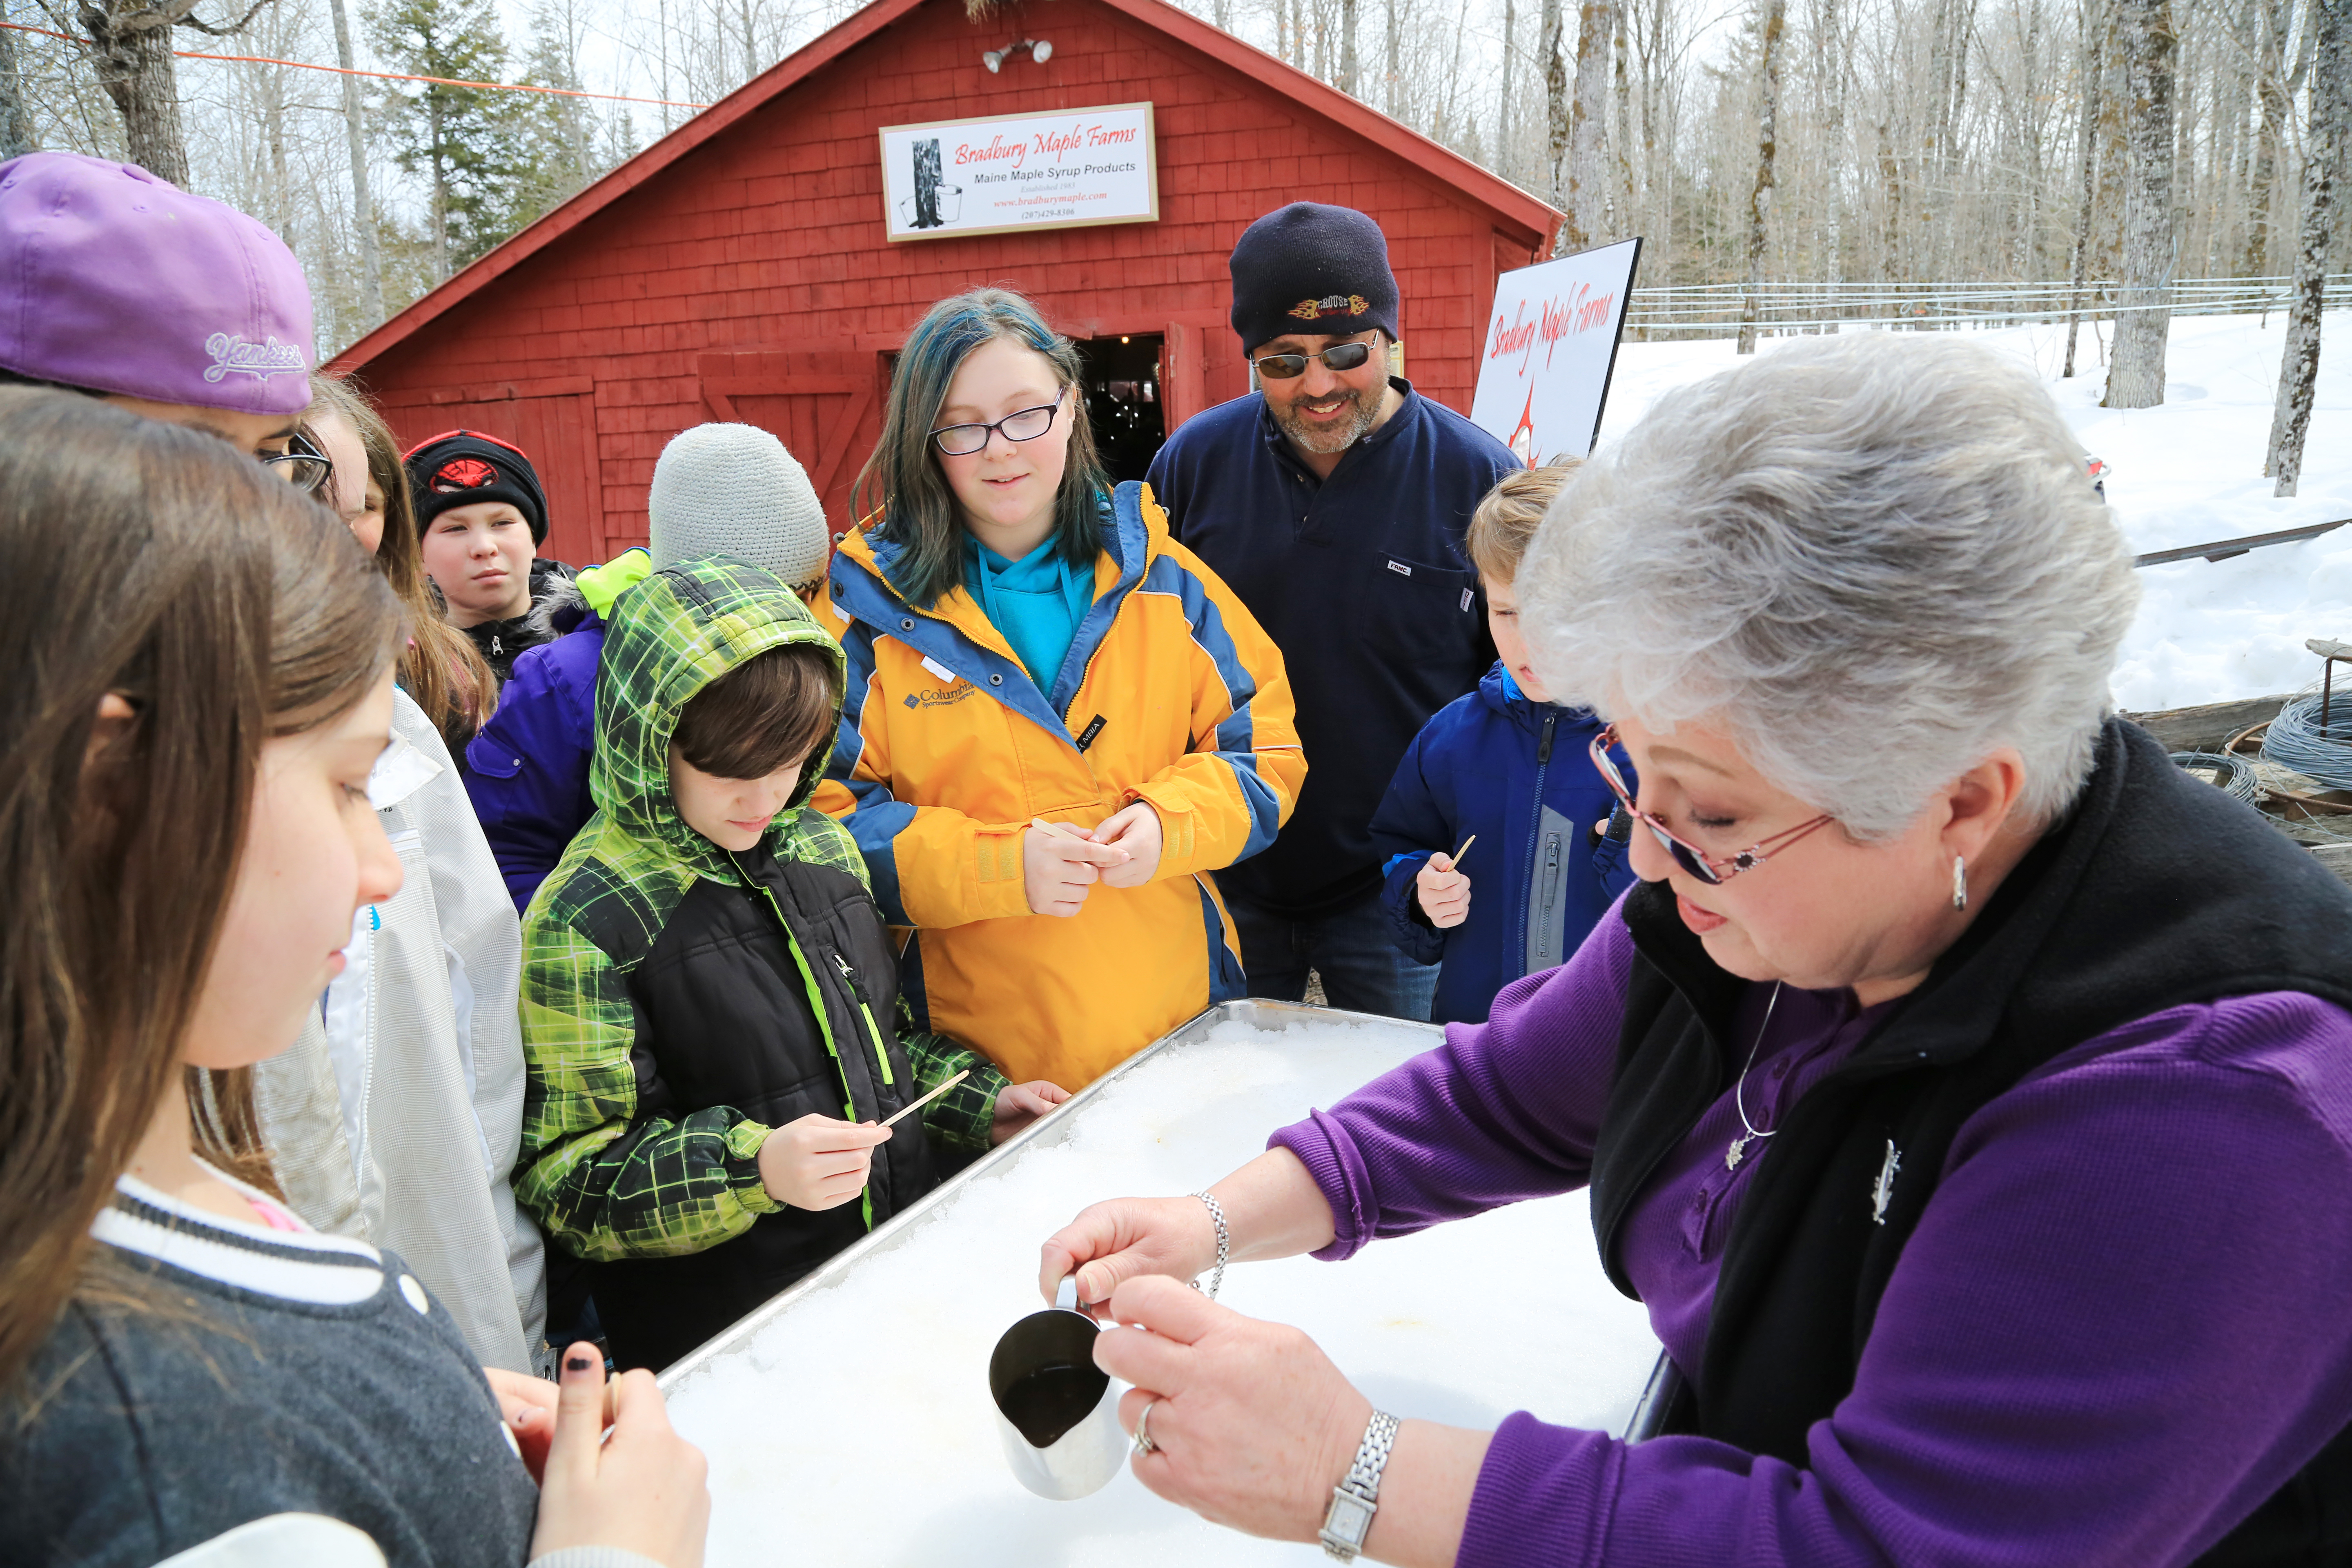 Come Learn - Maine Maple Syrup Sunday is a sweet spring day for the whole family!